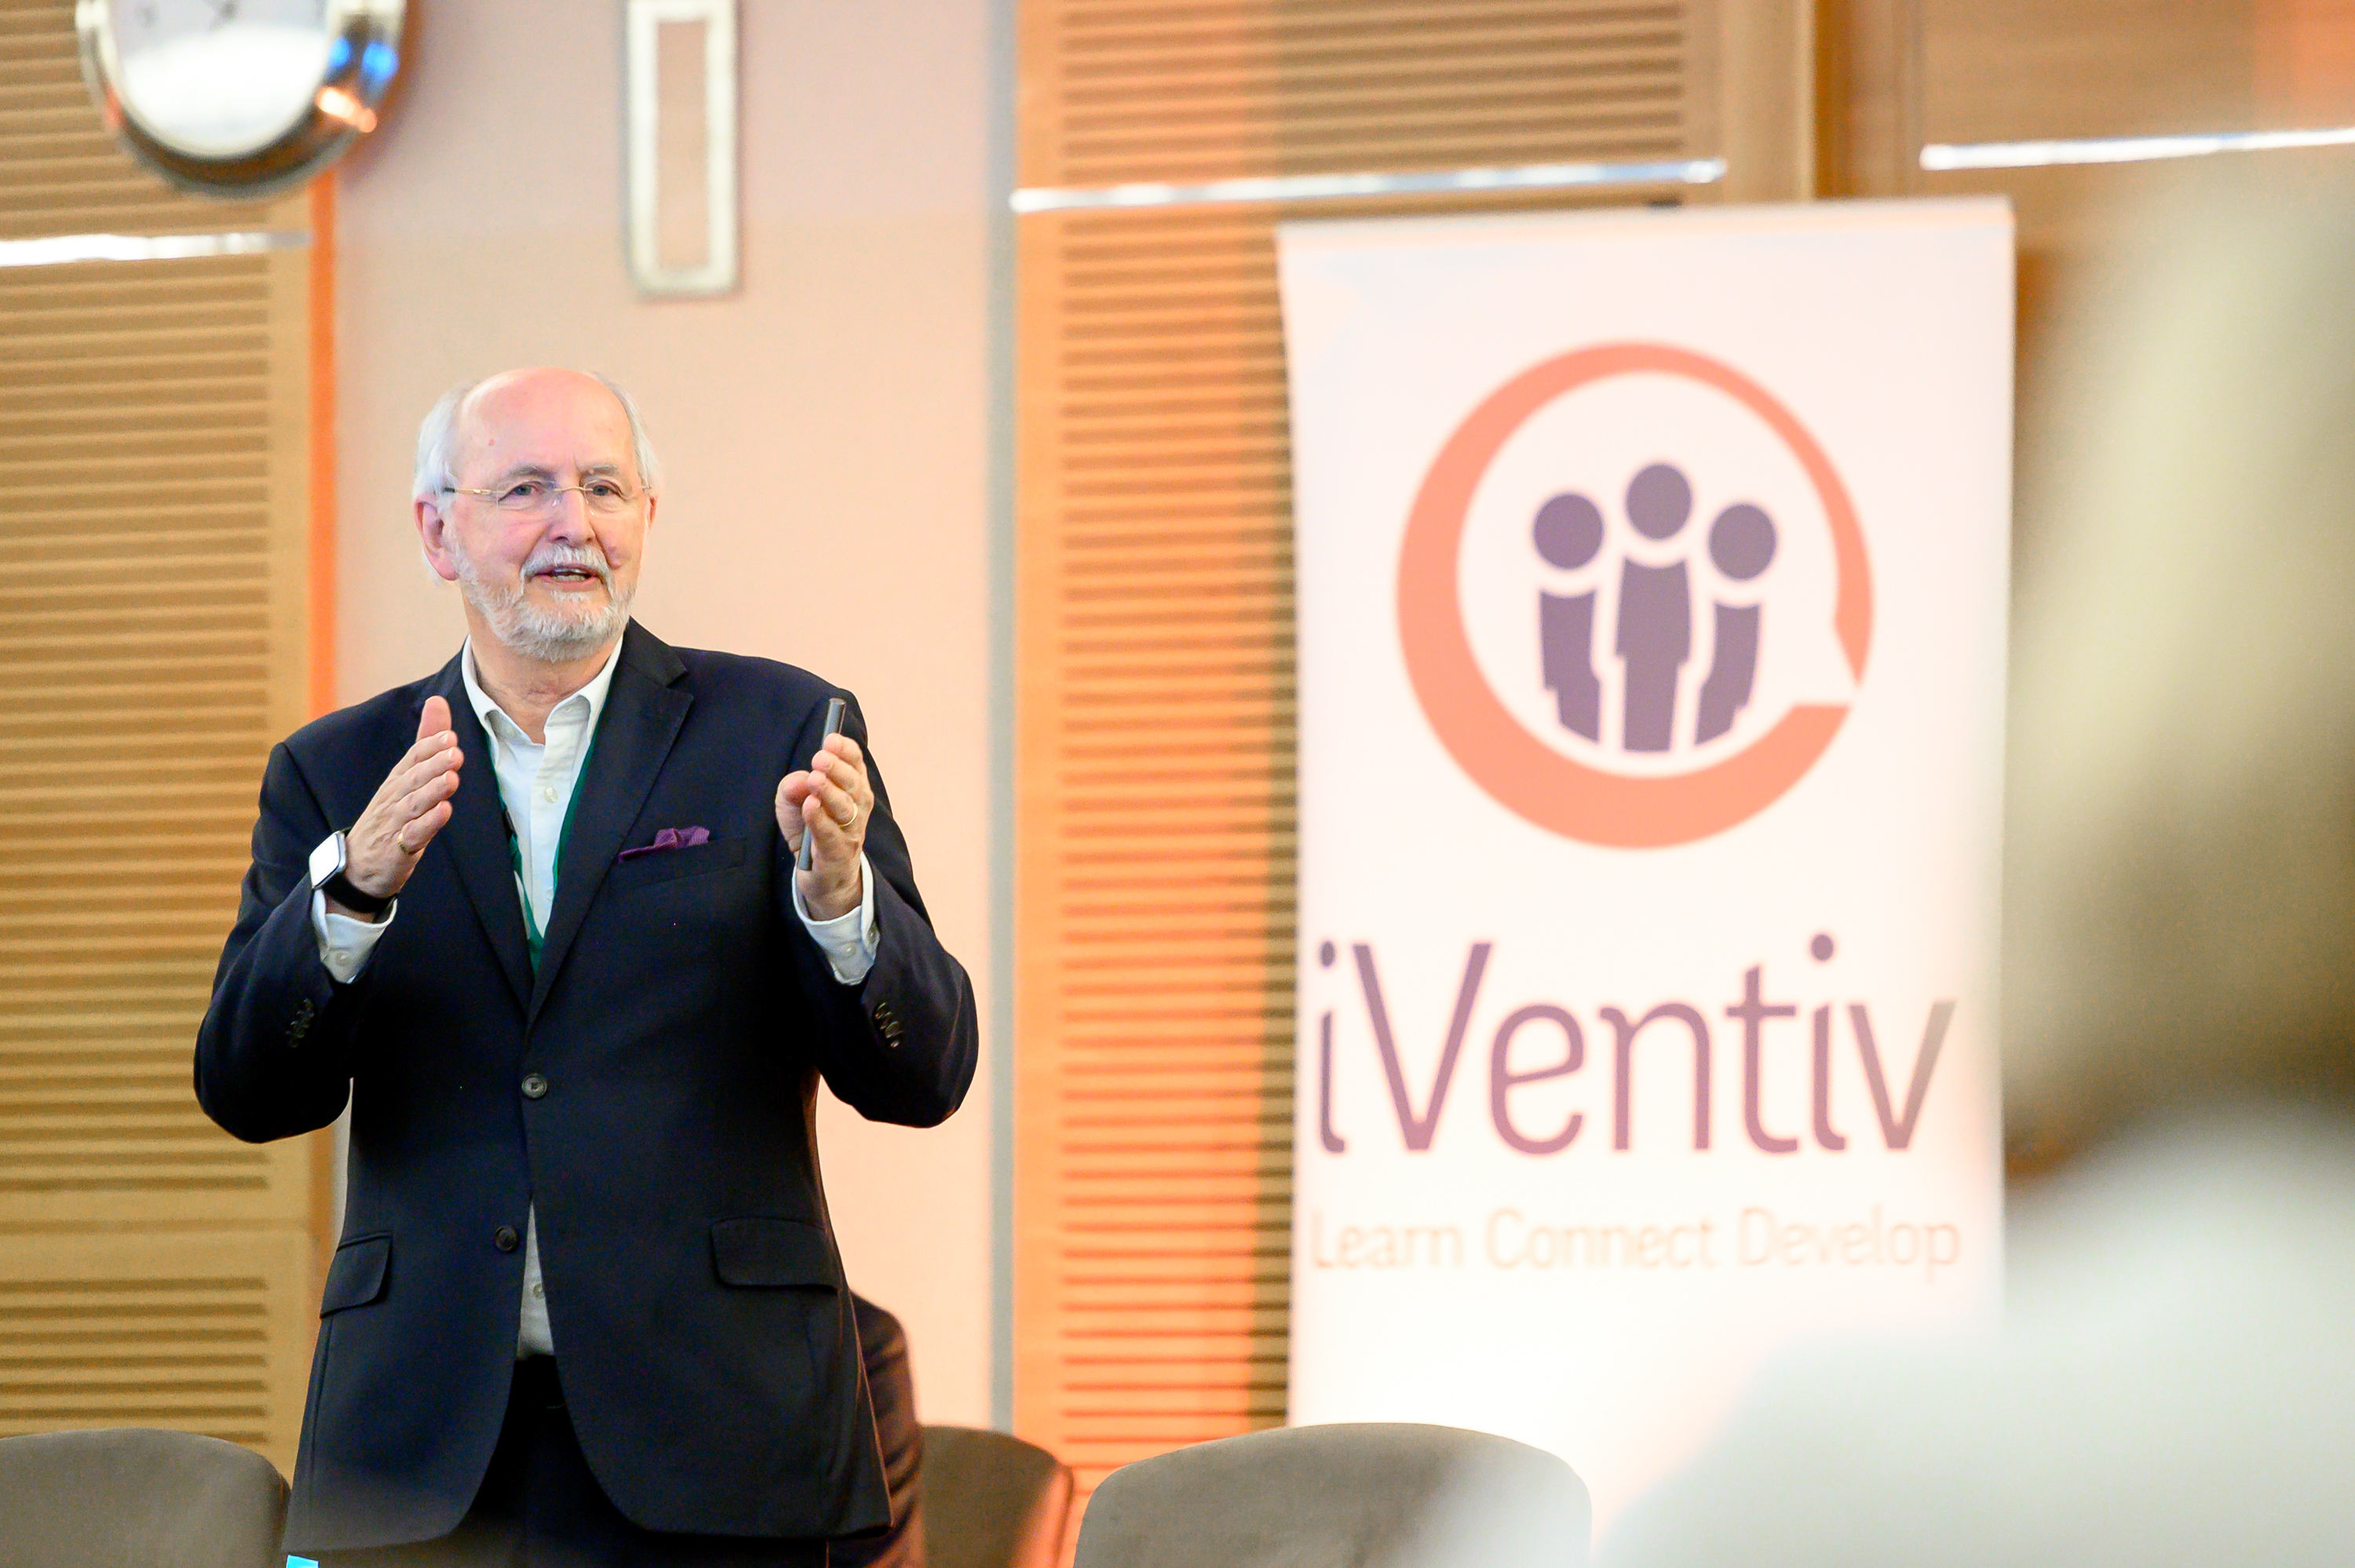 A man, Charles Jennings, in business dress, stands and speaks in front of an iVentiv banner.